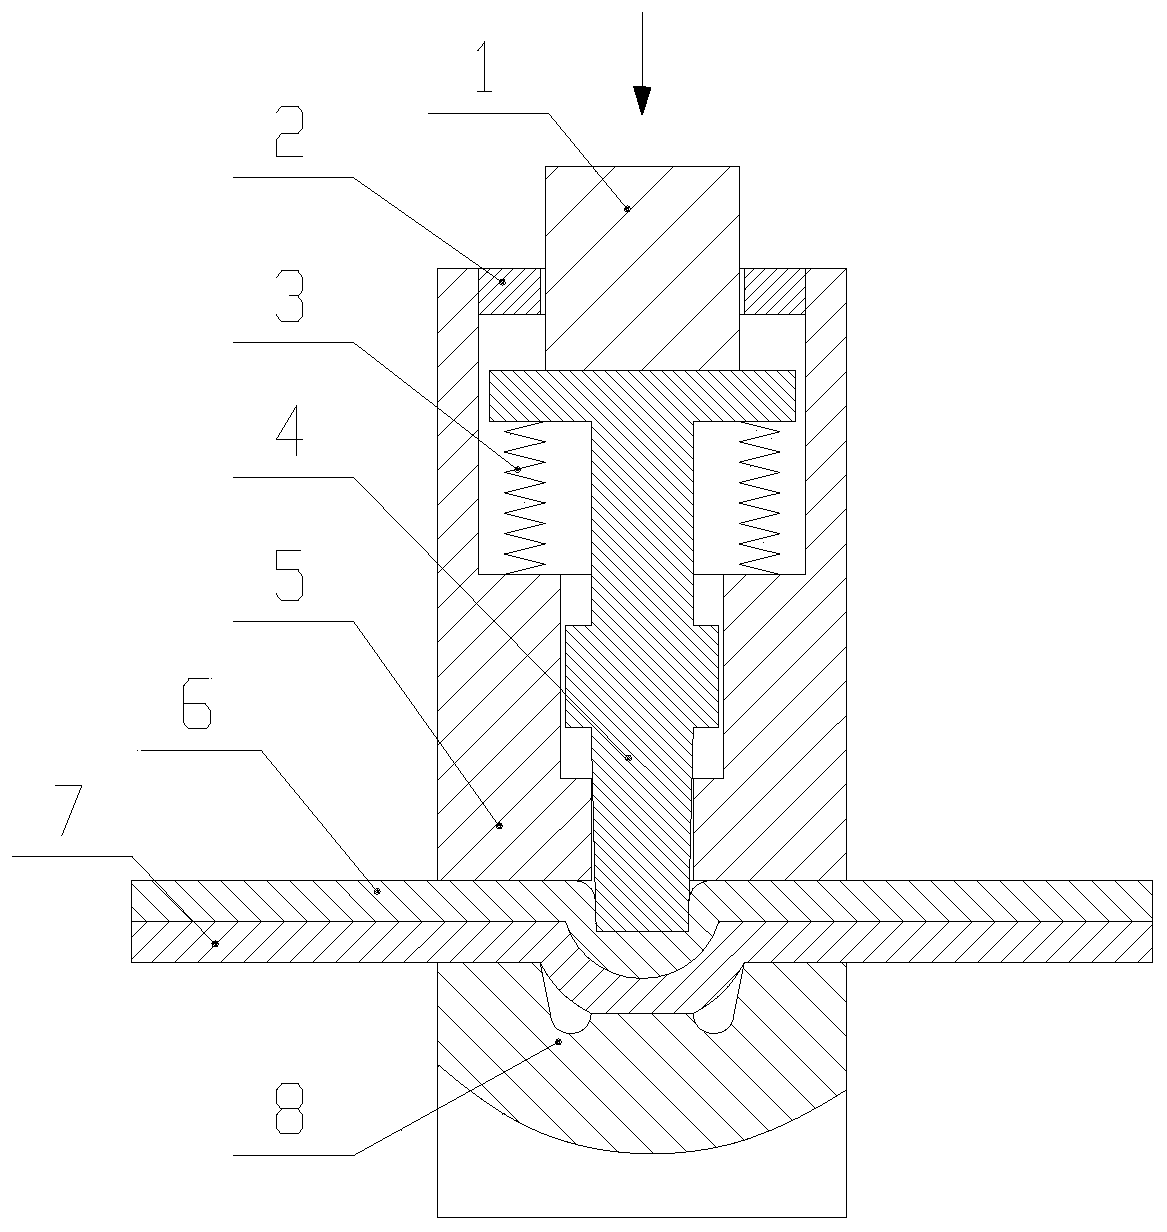 A kind of integral die friction rivetless connection method for lightweight plates